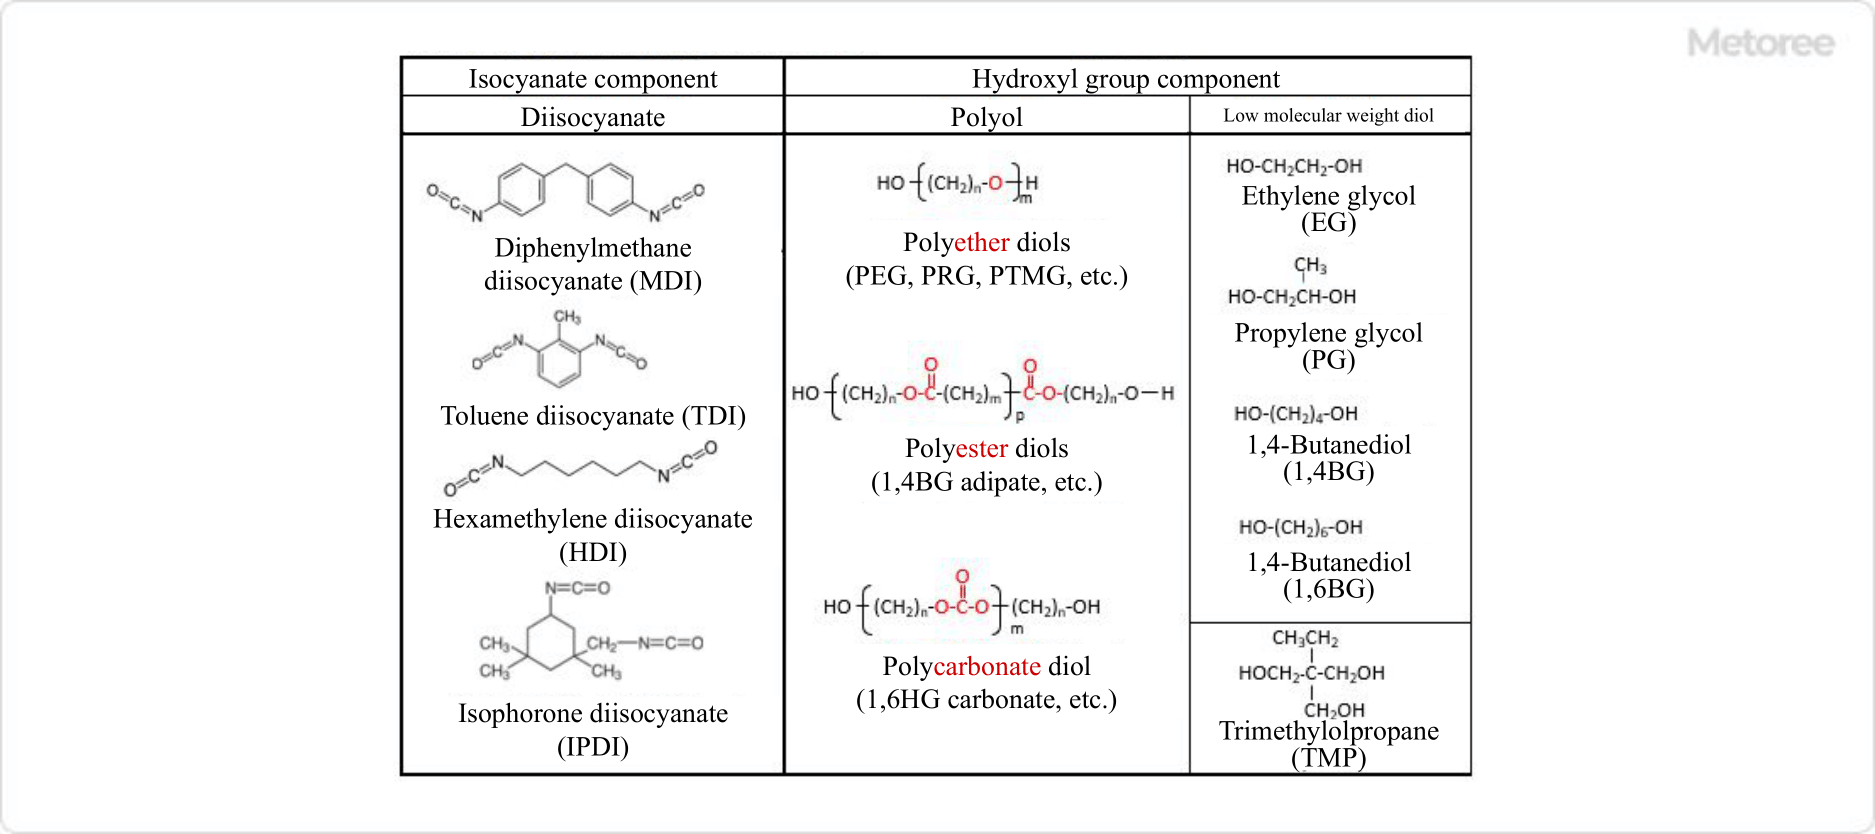 Figure 2. Typical examples of raw materials that make up polyurethane